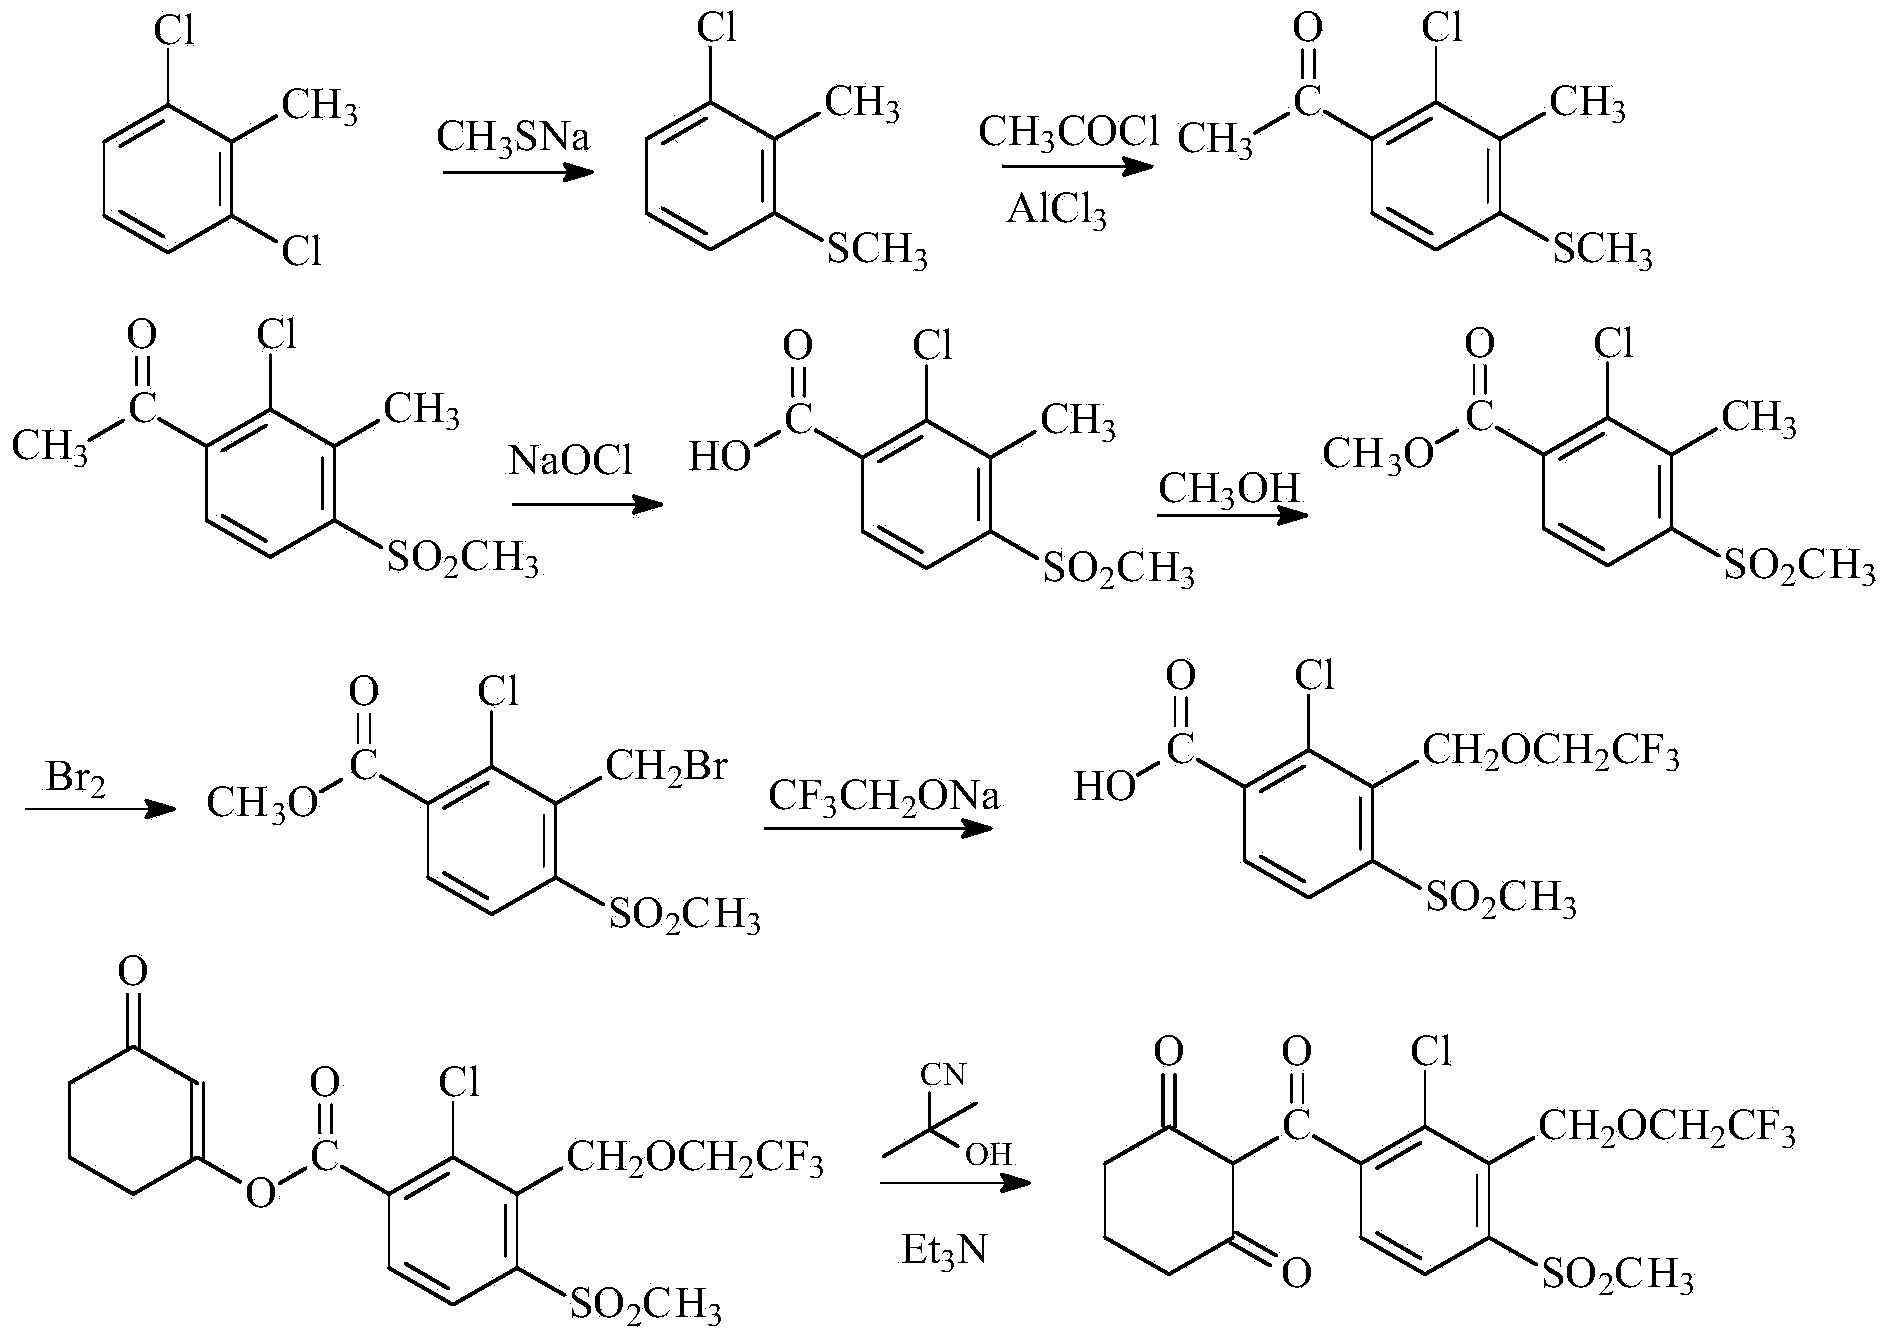 Process for synthesizing triketone herbicide cyclic sulcotrione